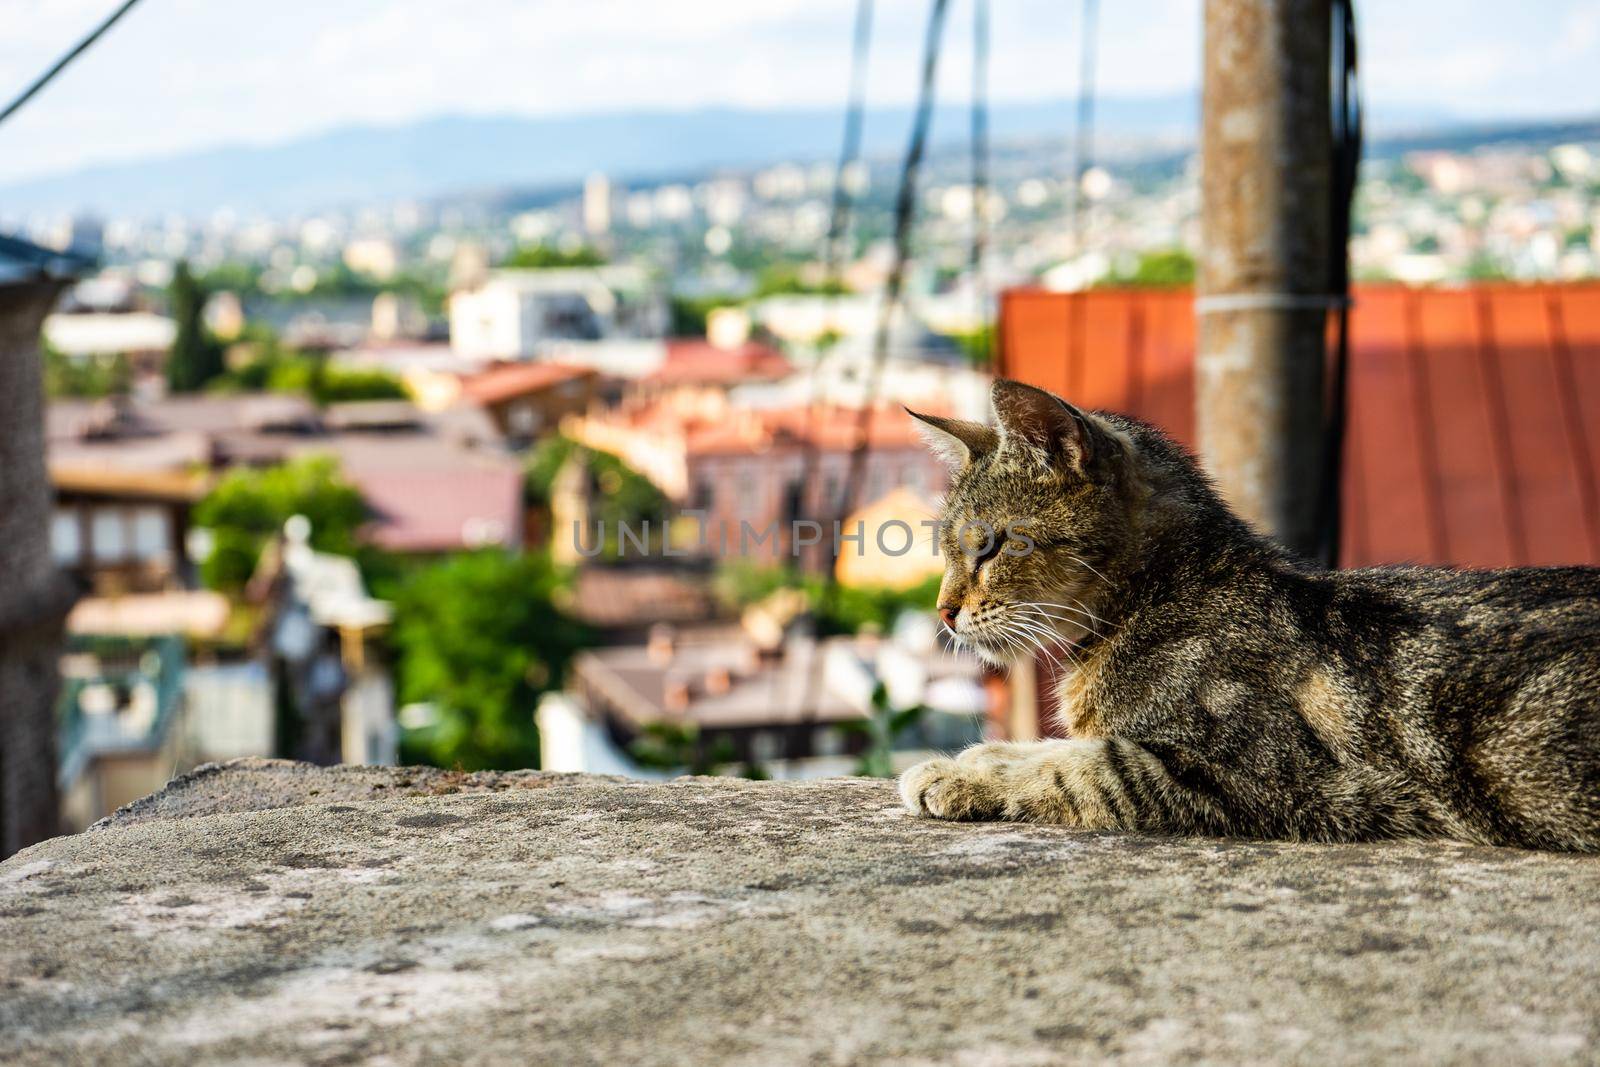 Homeless cat in Betlemi quater, historical part of Tbilisi city centre